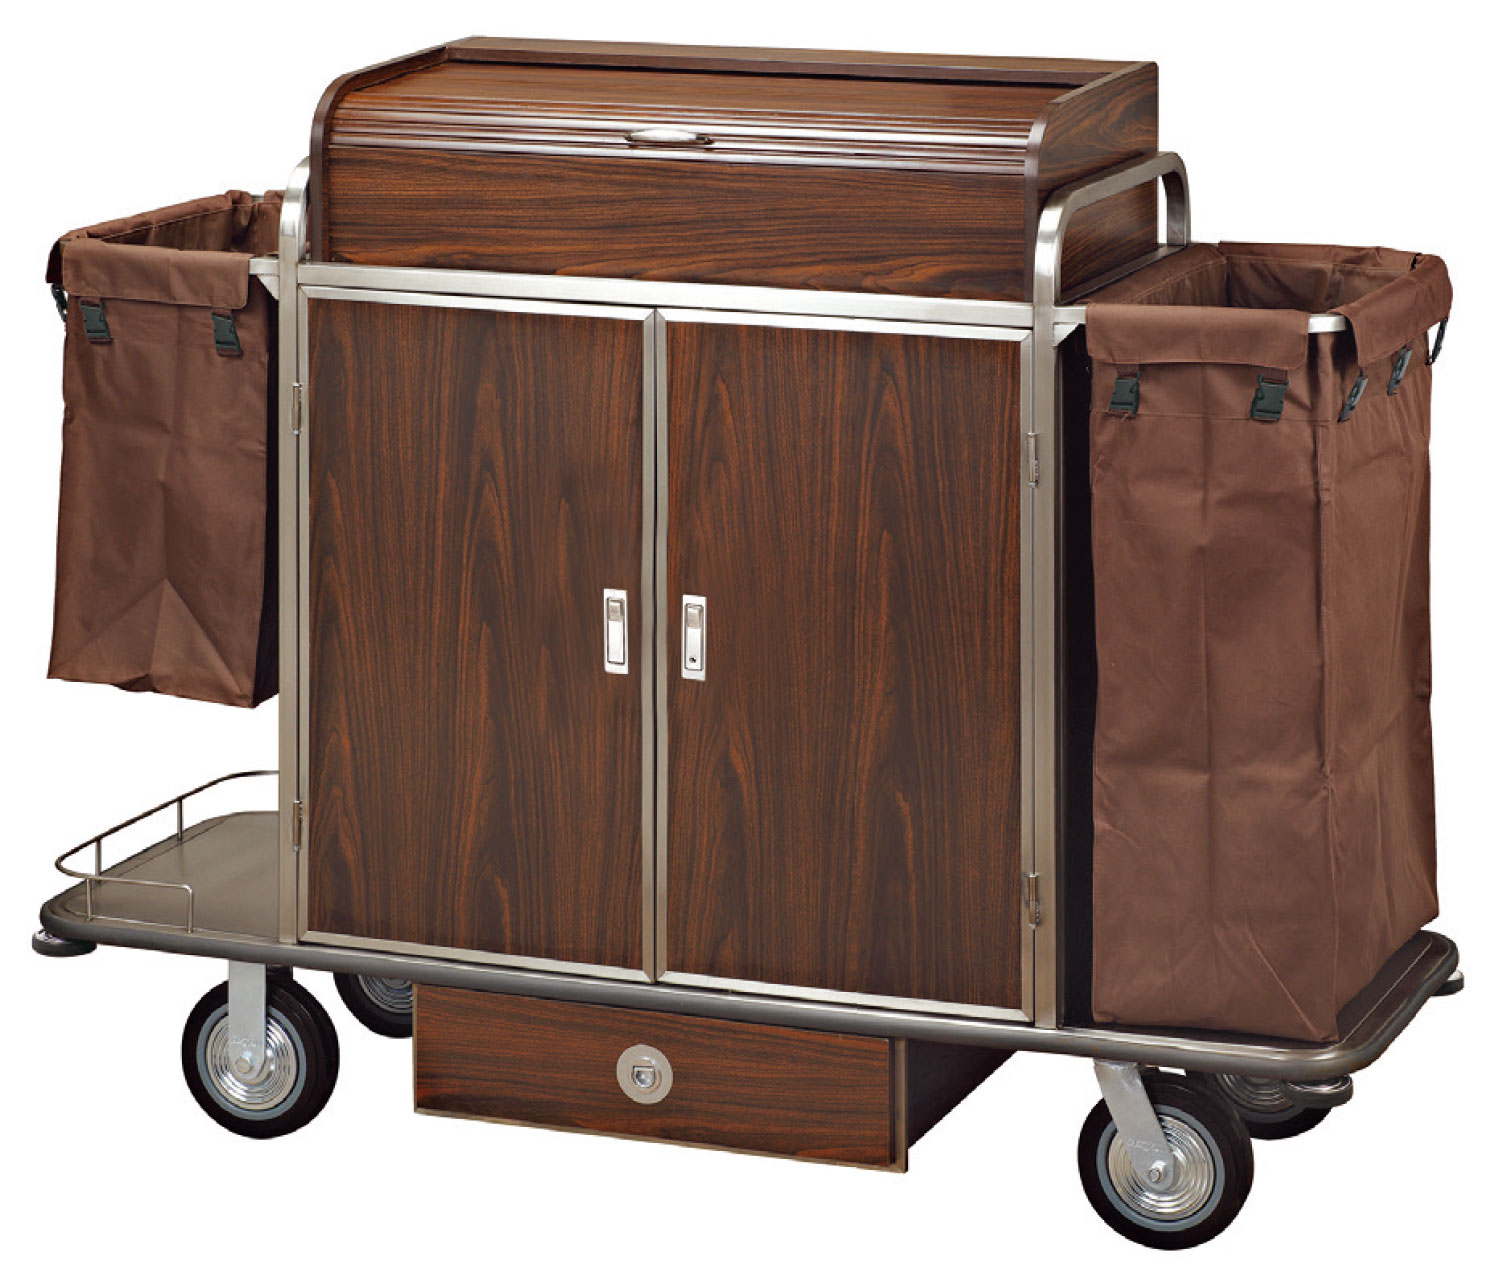 Housekeeping Carts for Guestrooms